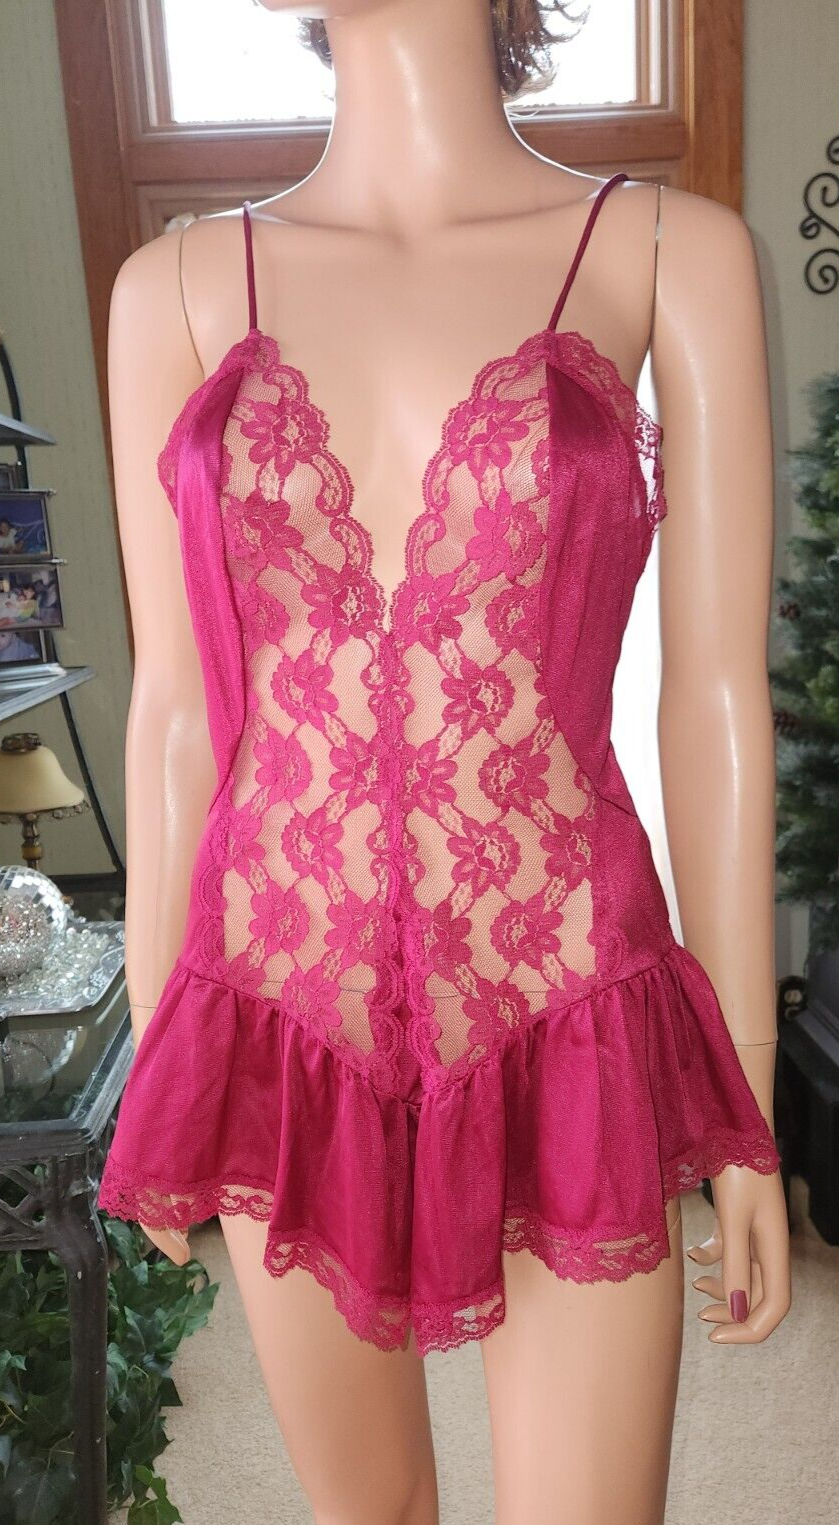 Primary image for Vtg JC Penney Sz S 8/10 Red Nylon Lace Babydoll Nightgown Open Teddy PinUp Glam